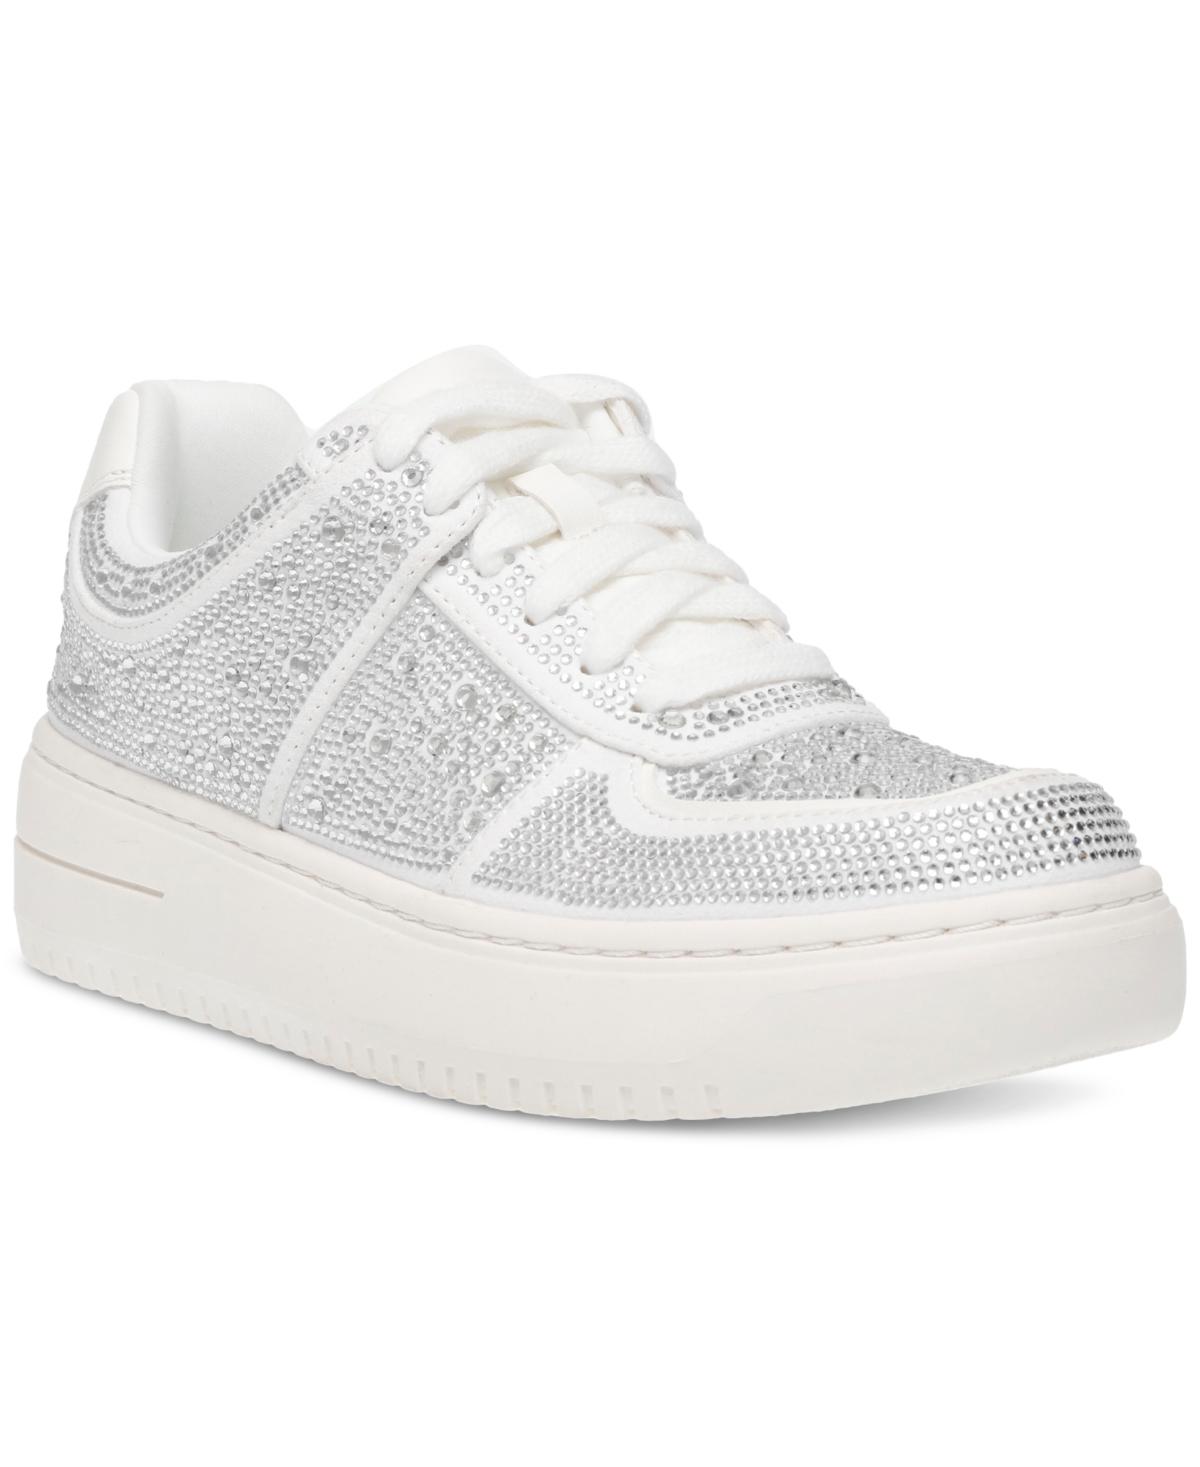 Fallun Bling Embellished Sneakers, Created for Macy's - Silver Bling